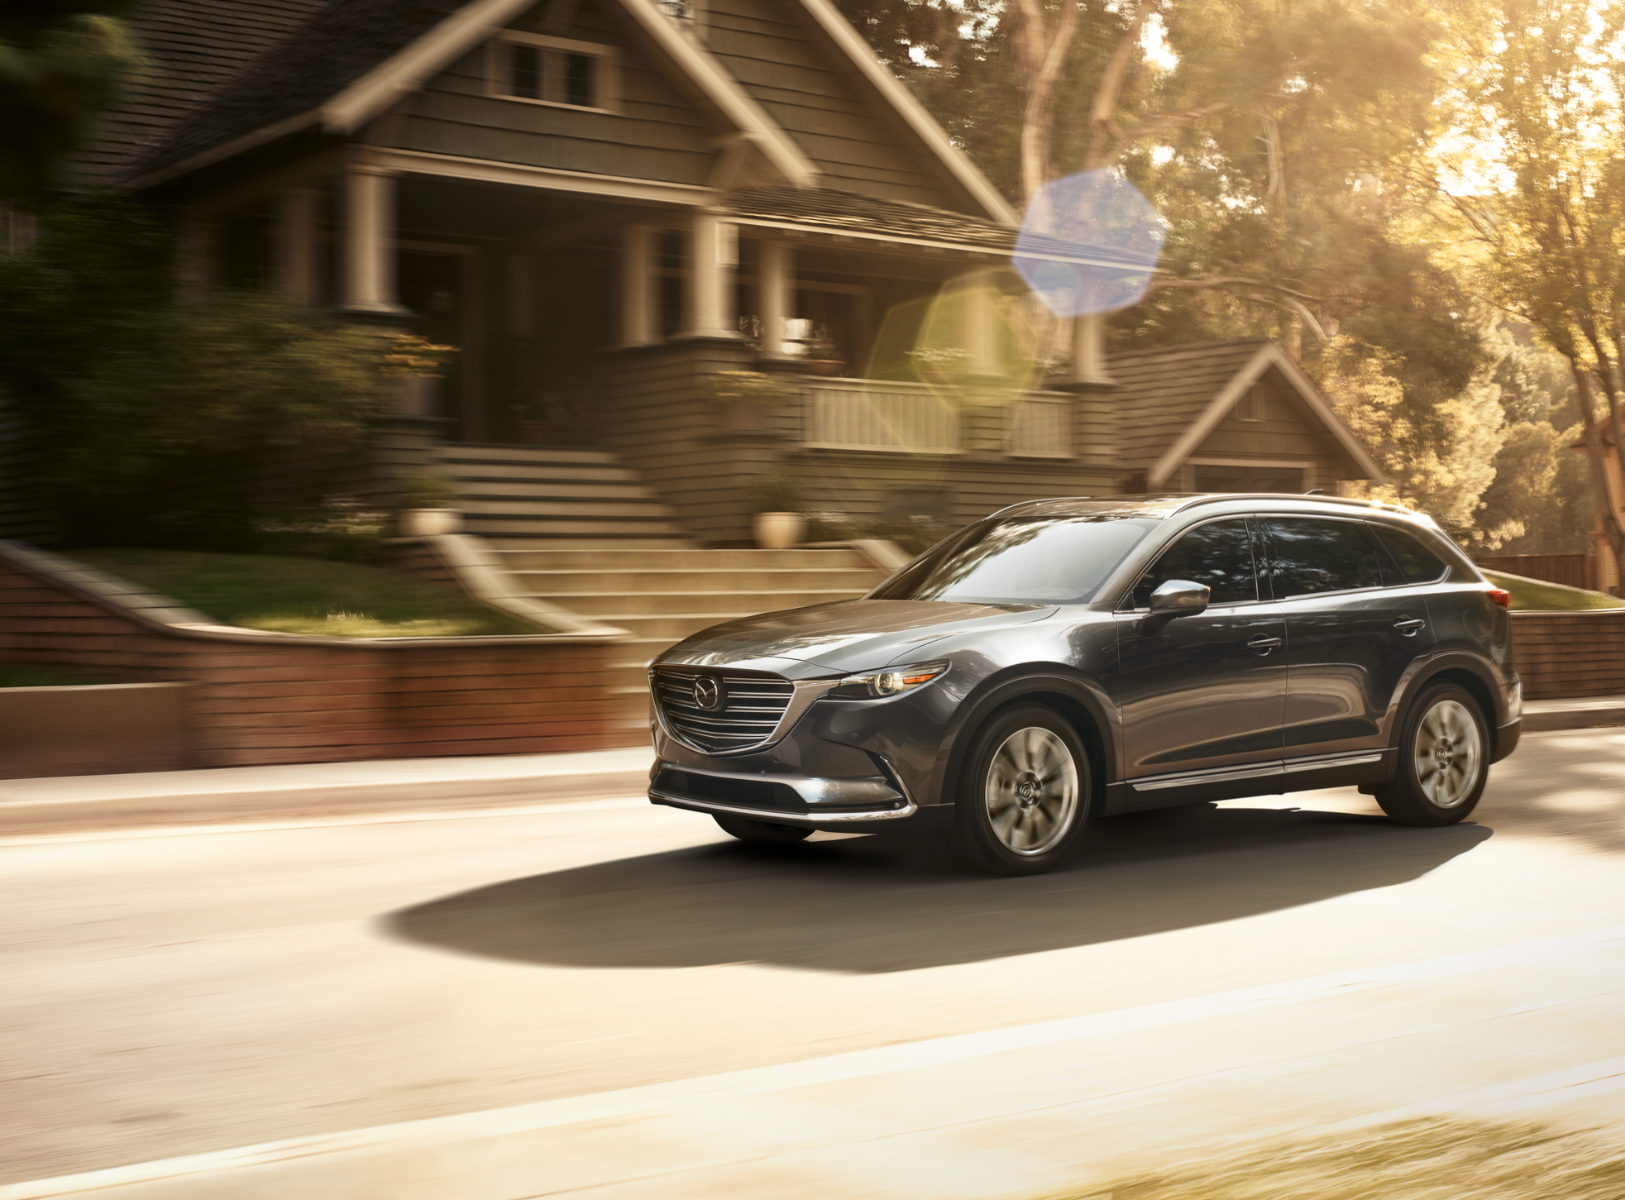 5 Things You Probably Didn't Know About The 2019 Mazda CX-9